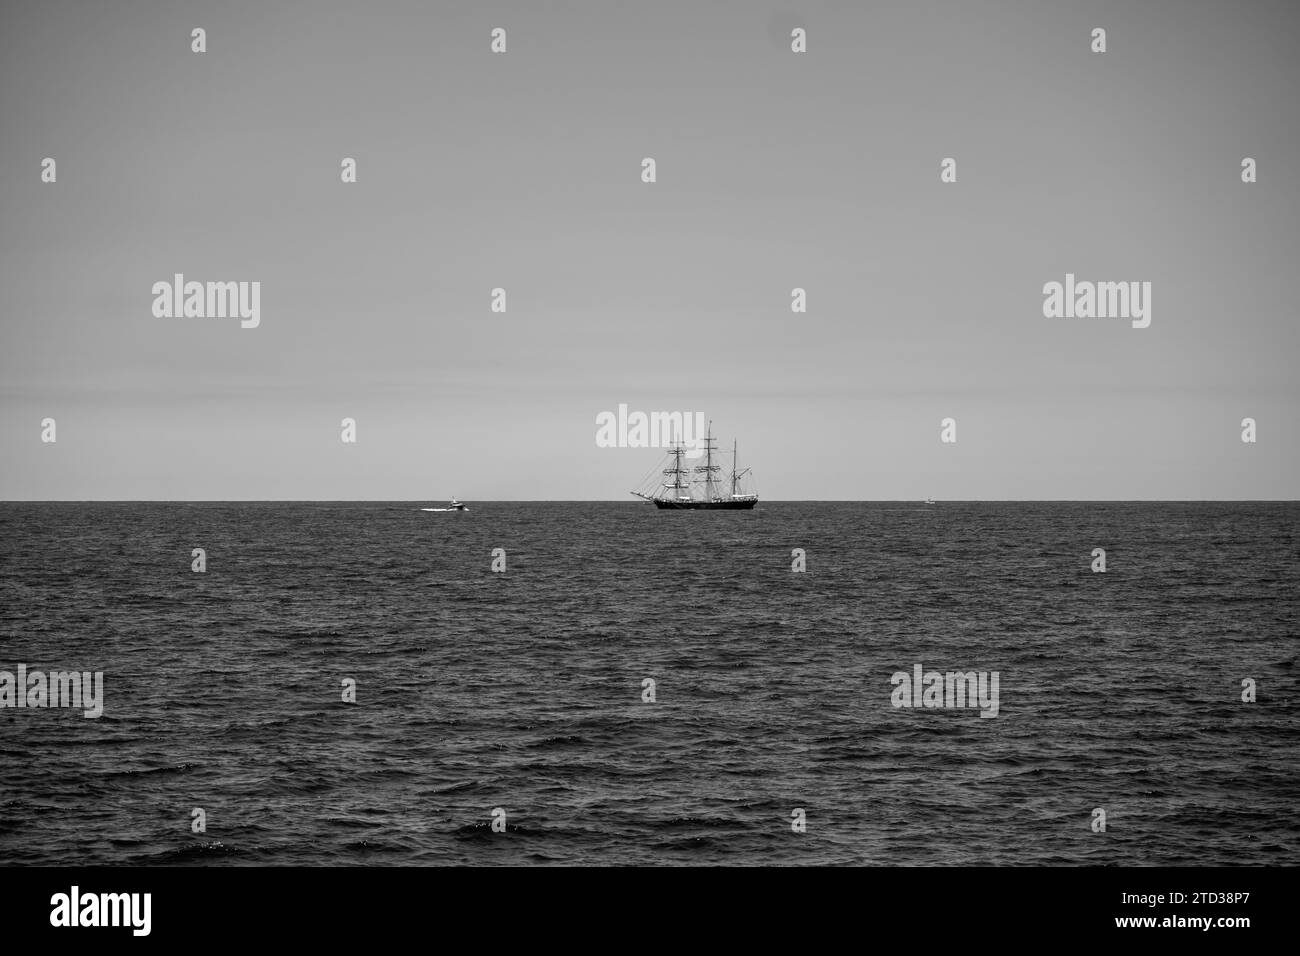 Vintage Ship Sailing on the Pacific Ocean Stock Photo